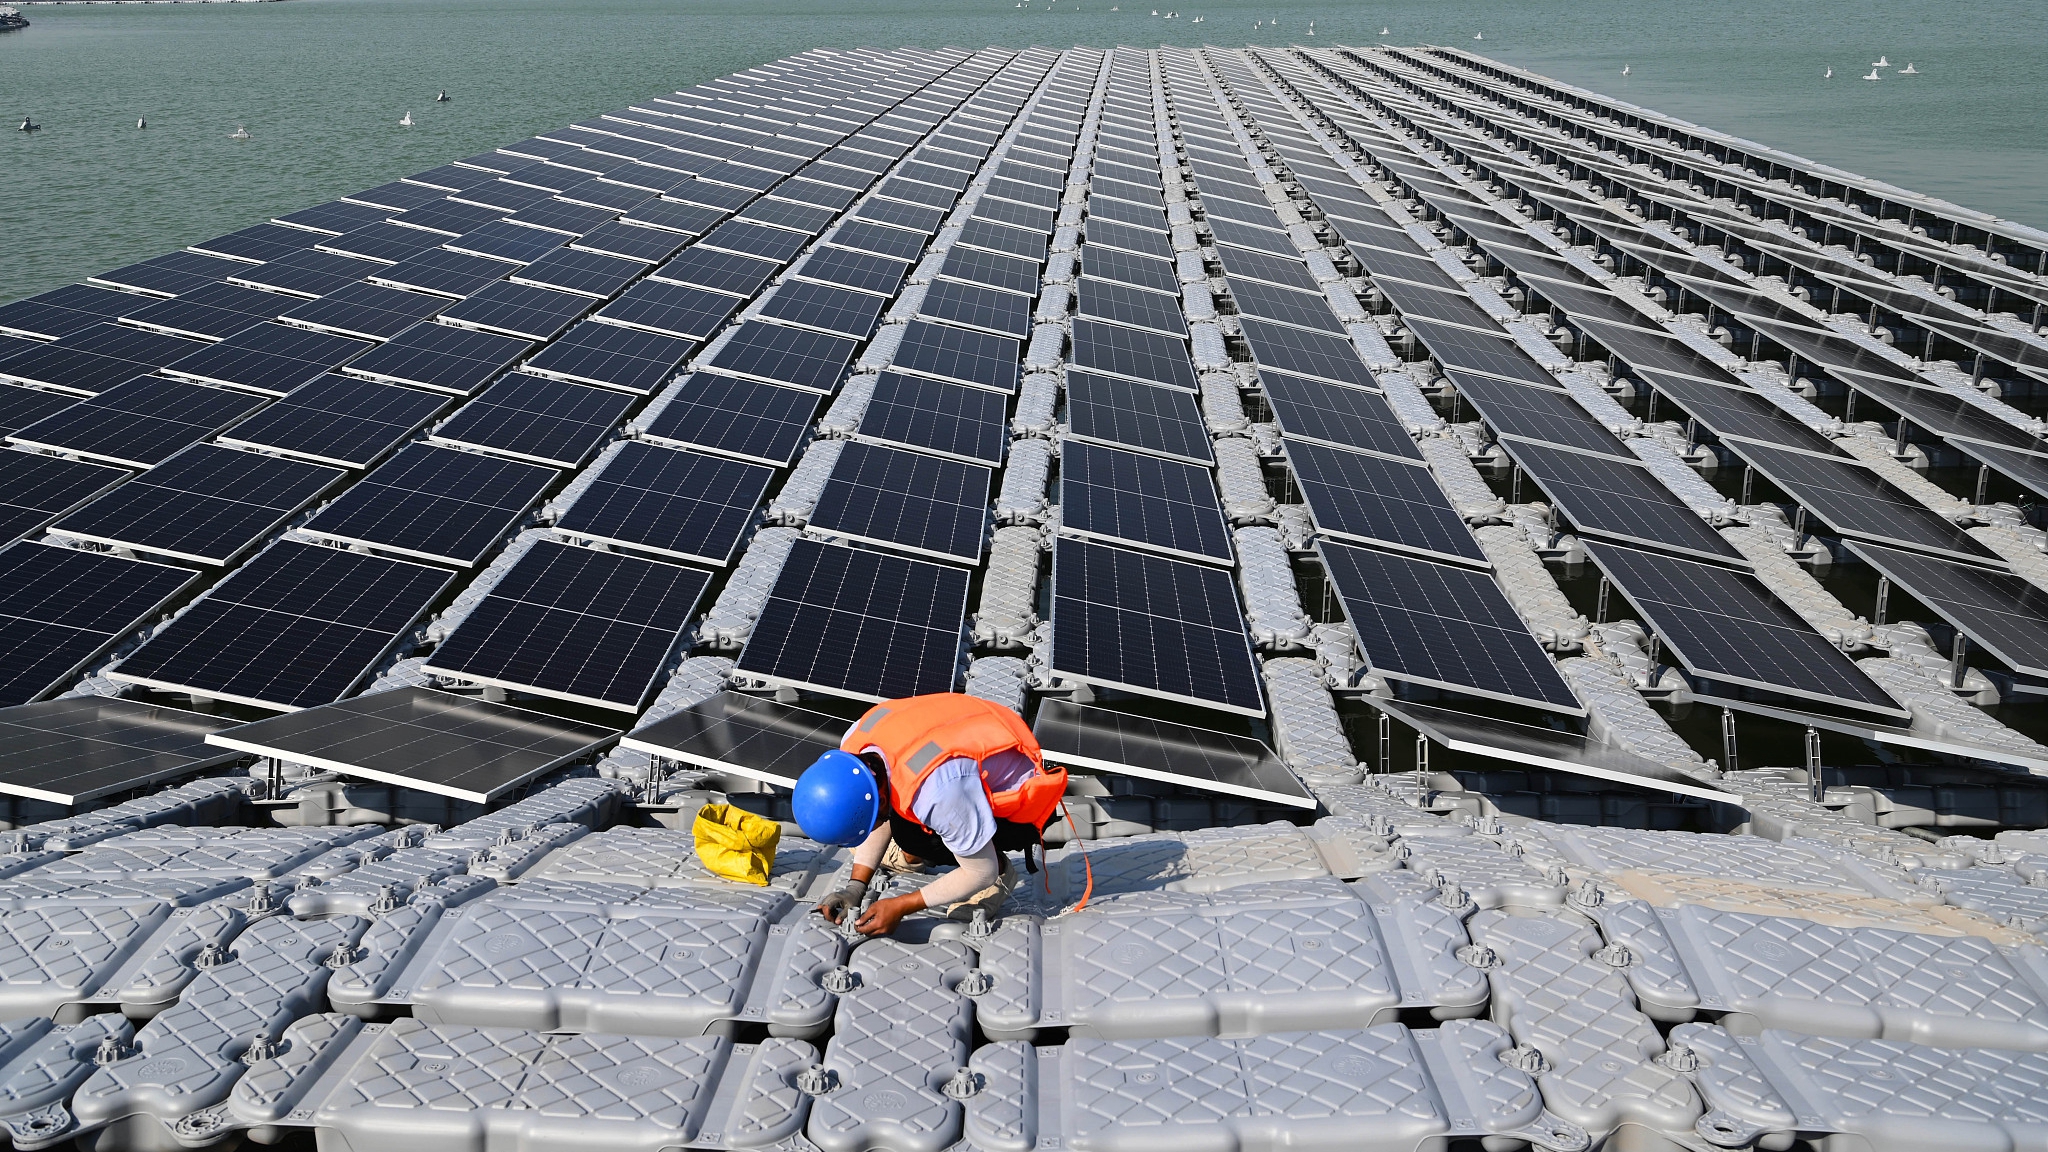 A photovoltaic project under construction in Liaocheng, east China's Shandong Province, September 29, 2022. /CFP